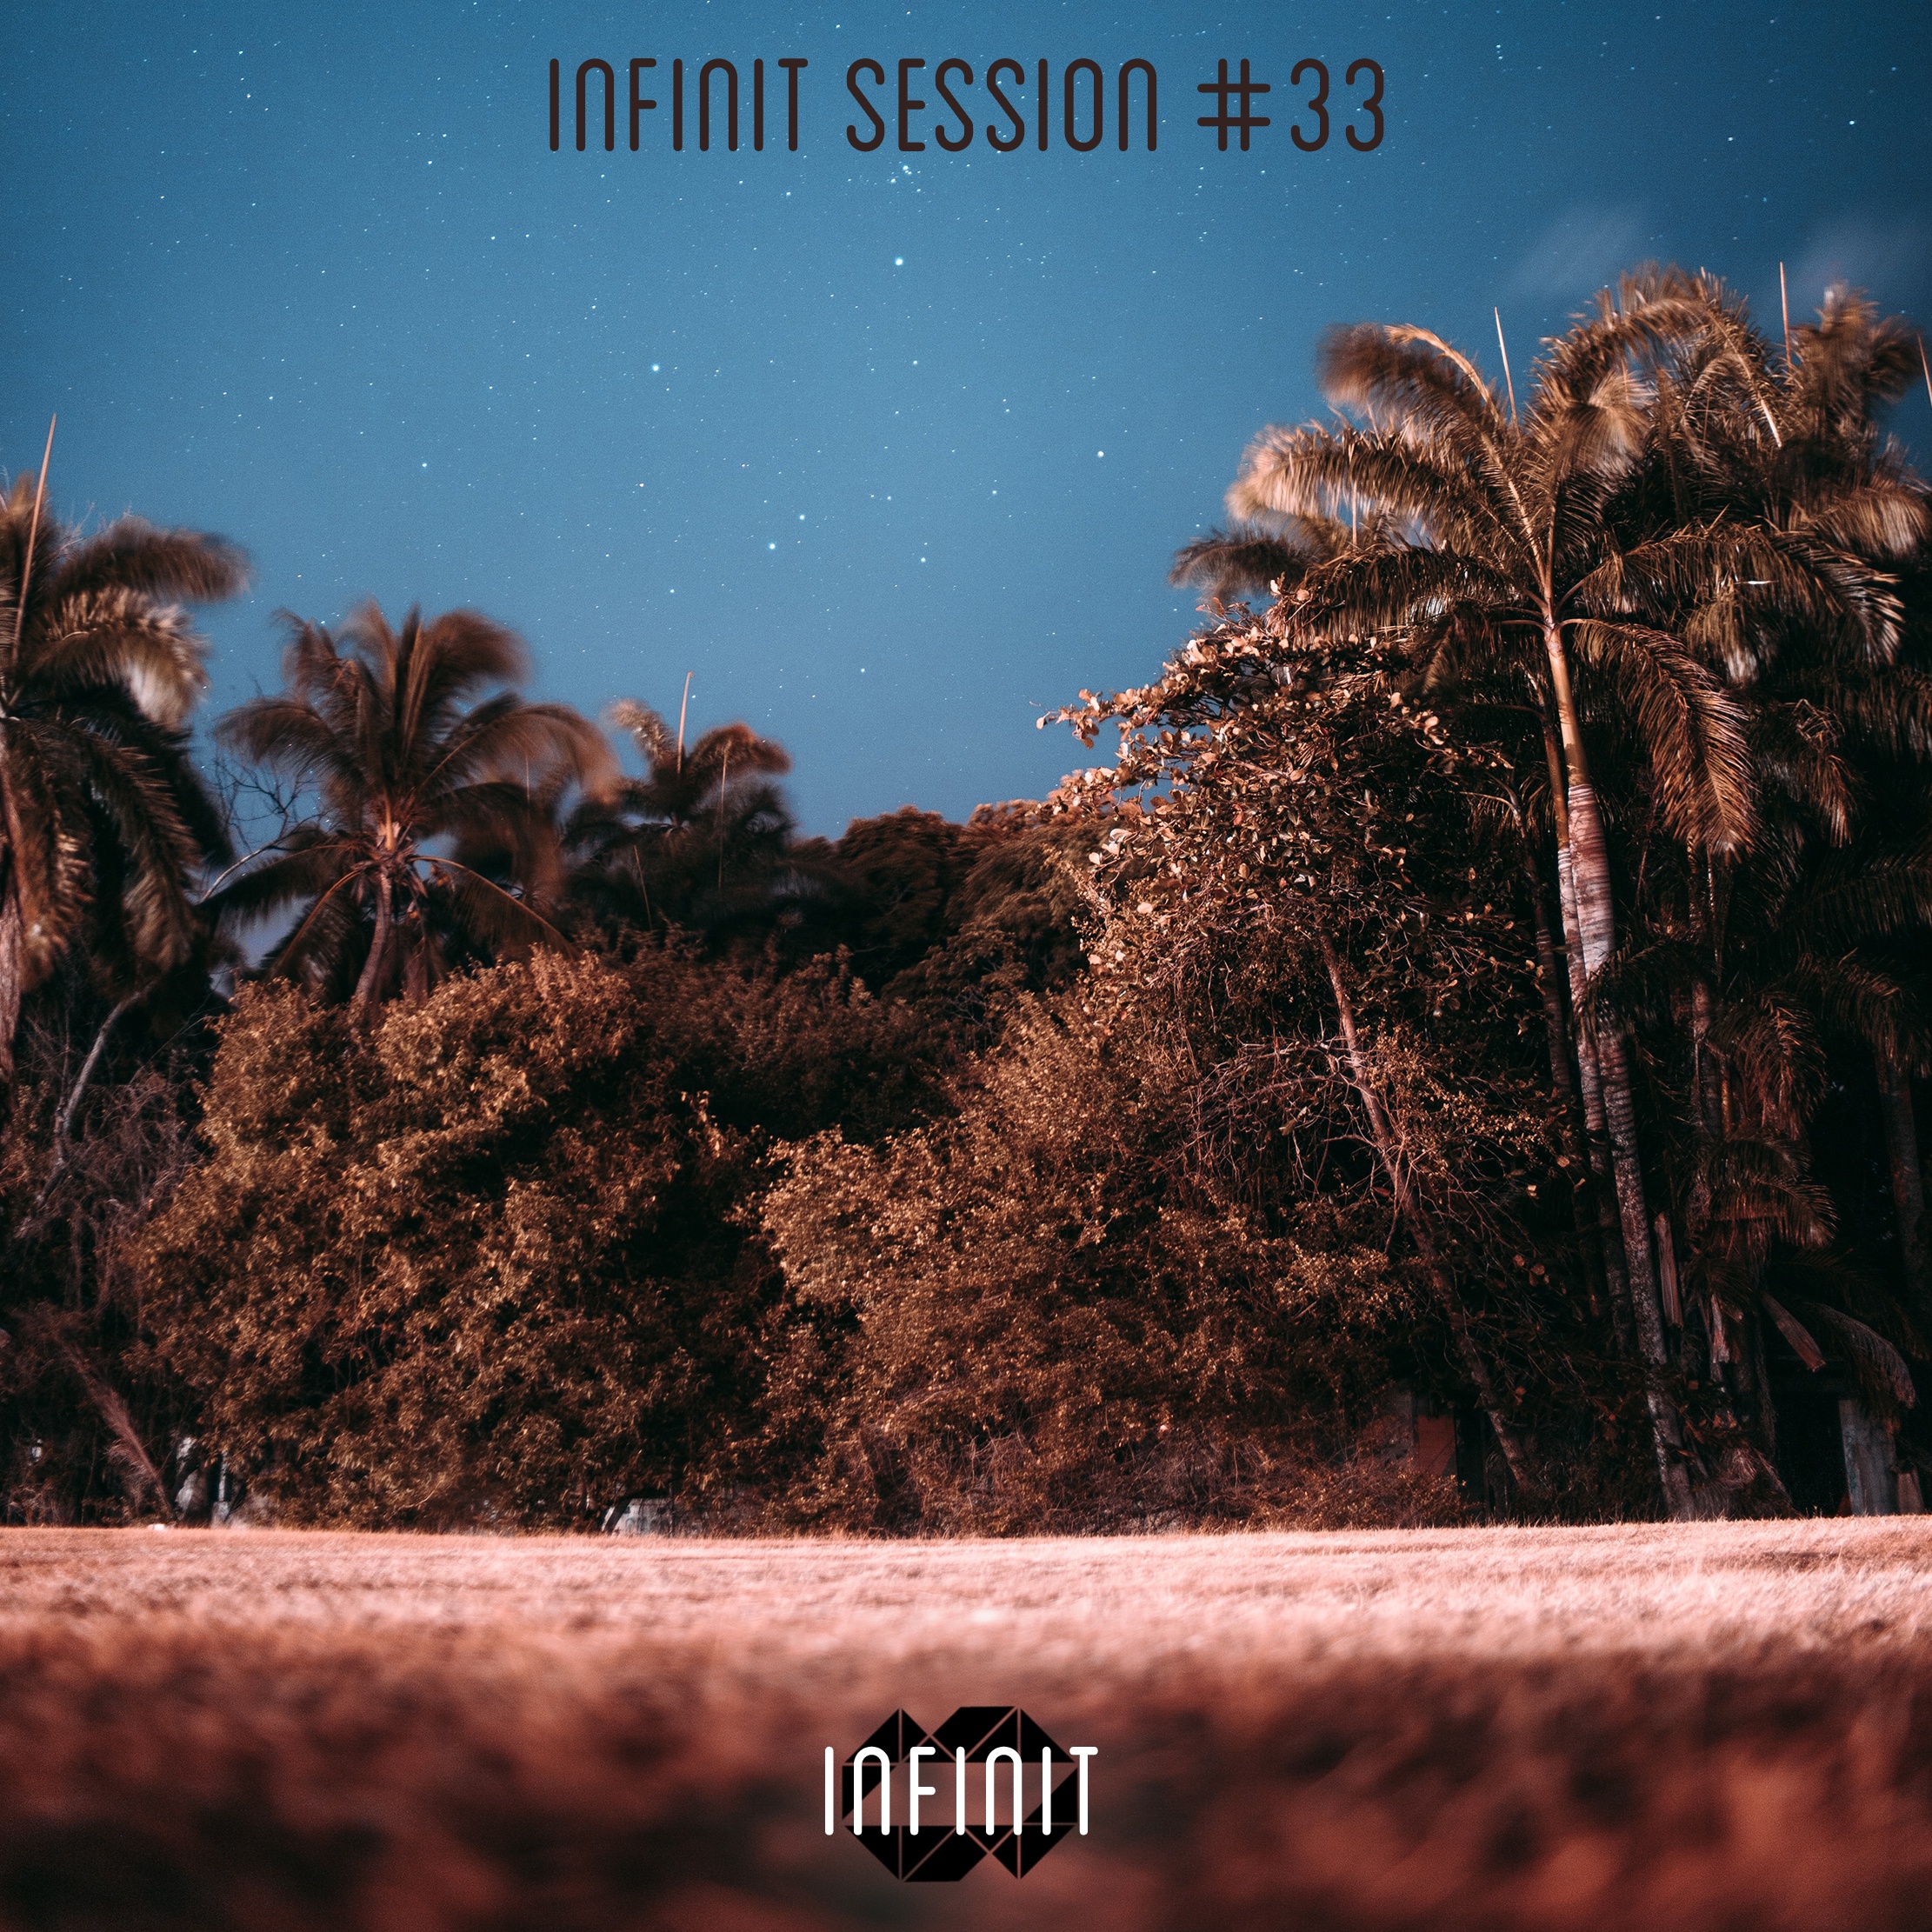 infinit session 33